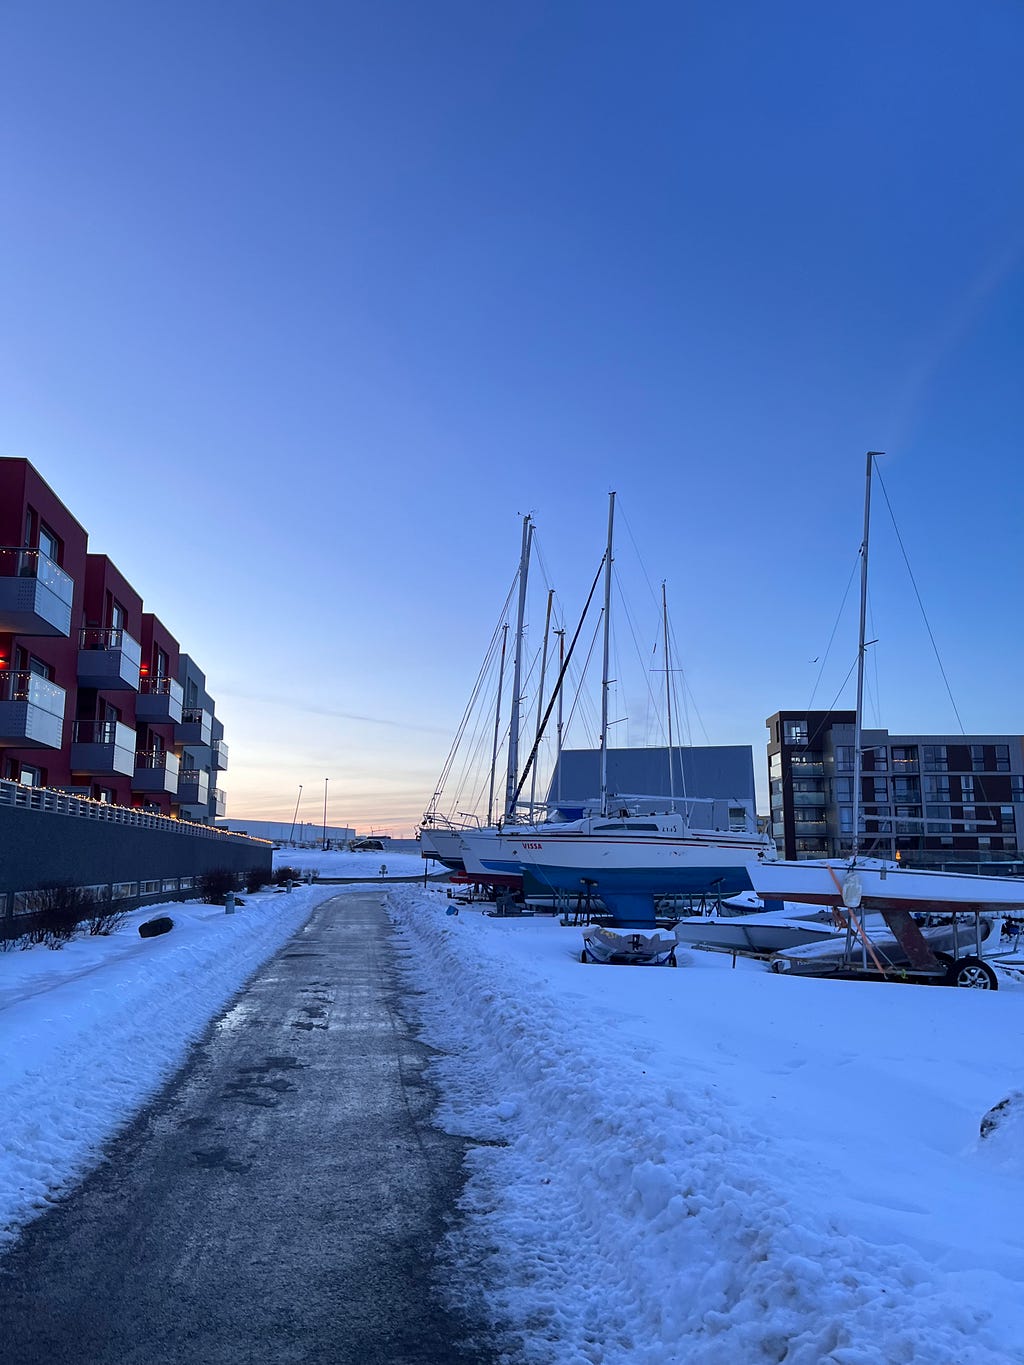 Image of boats parked in a snowy port, buildings in the background